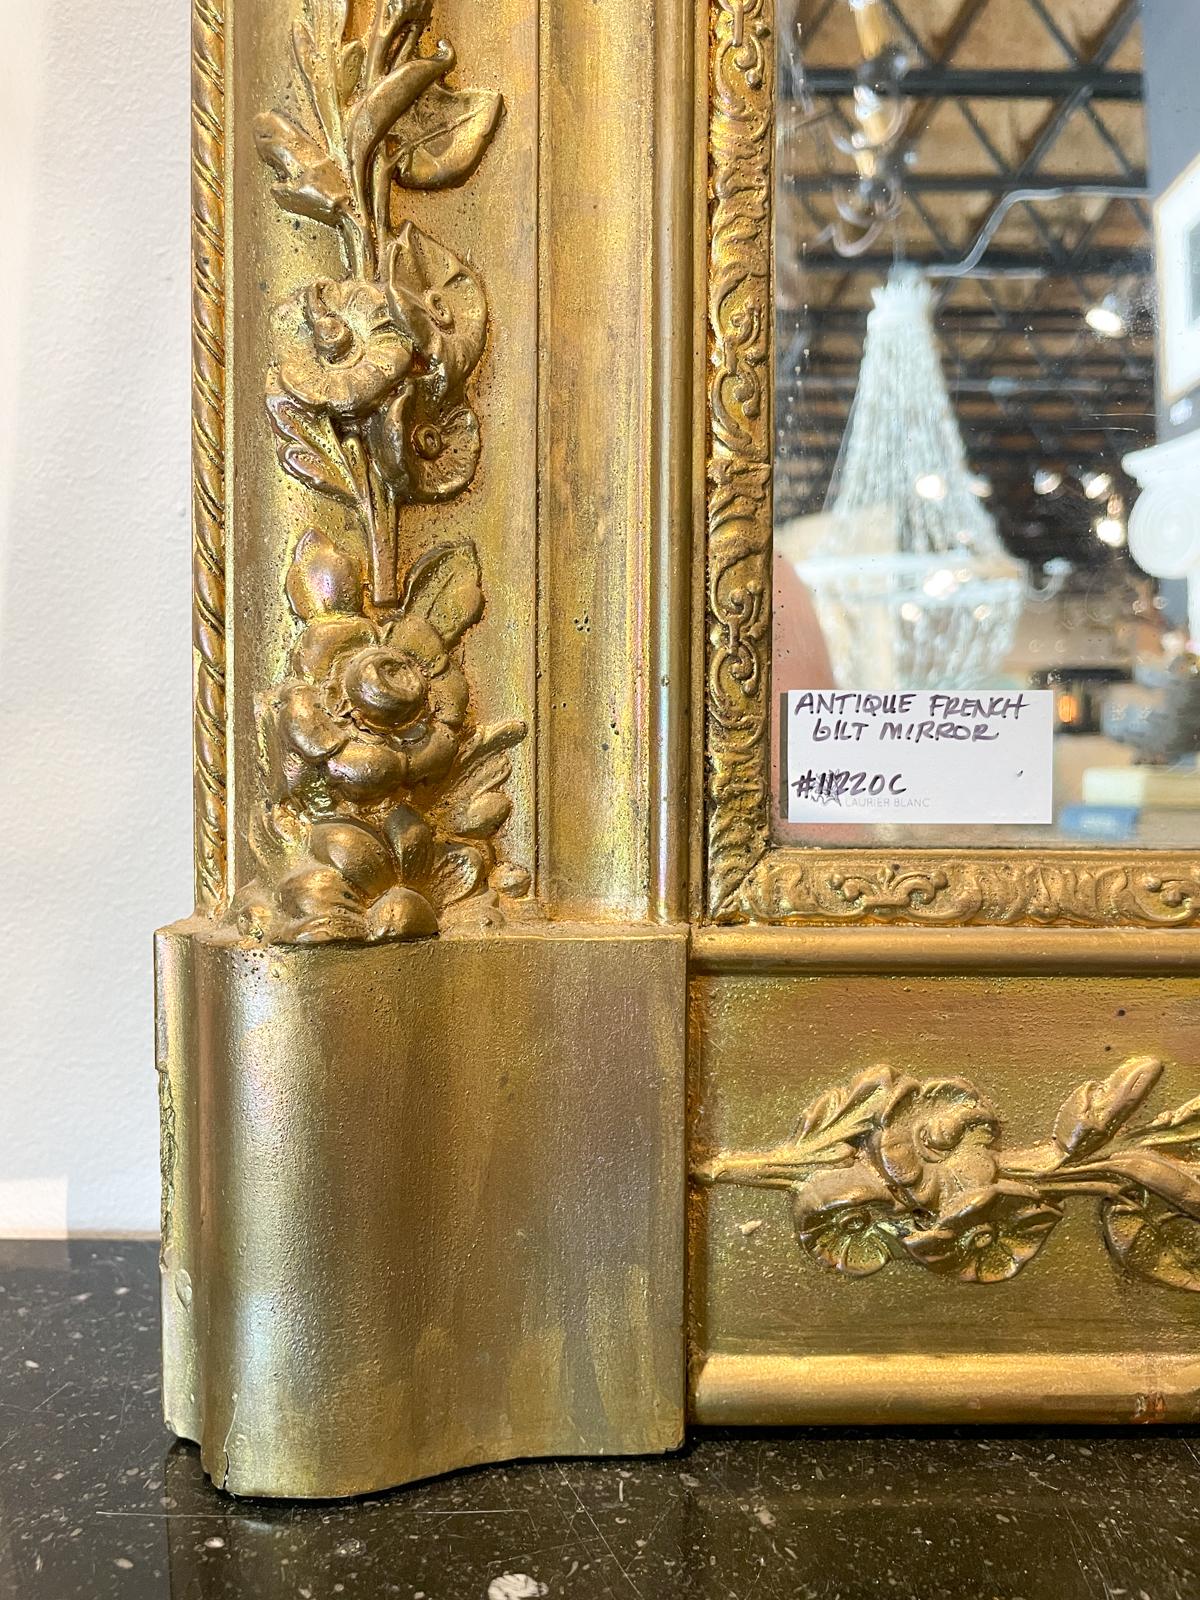 This antique French gilt wall mirror is rectangular in design with floral accents around the frame which has a heavier width at the bottom. The original, antique glass is showing signs of age, with the crystalline structure most visible around the